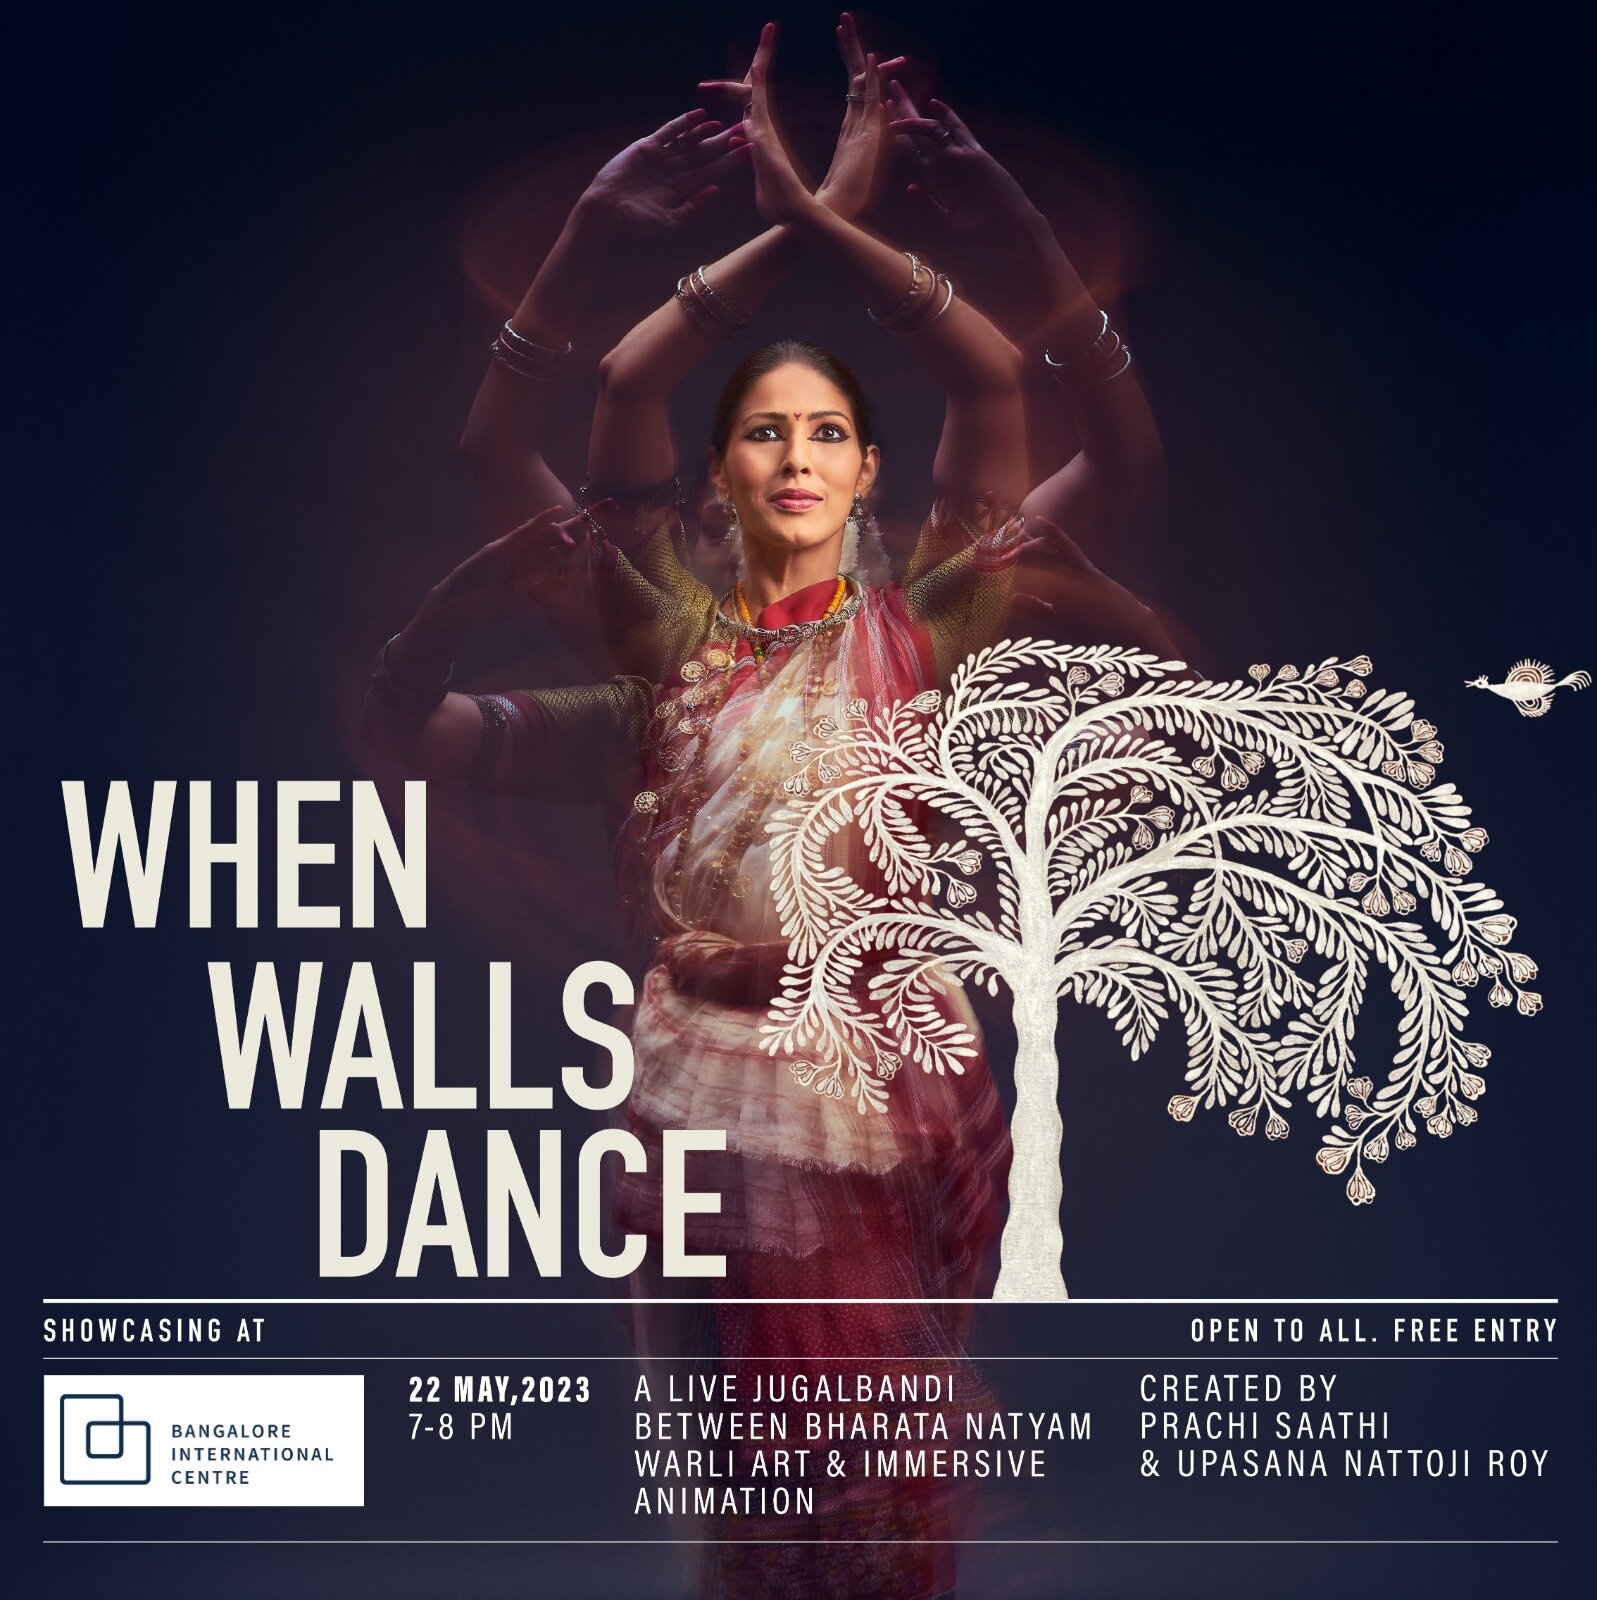 Prepare to be entranced as we bring you 'When Walls Dance' in Bengaluru on May 22nd, Monday from 7:00-8:00 pm at the prestigious  @bicblr Bangalore International Centre. 

You won't want to miss this stunning display of art and creativity. RSVP now t